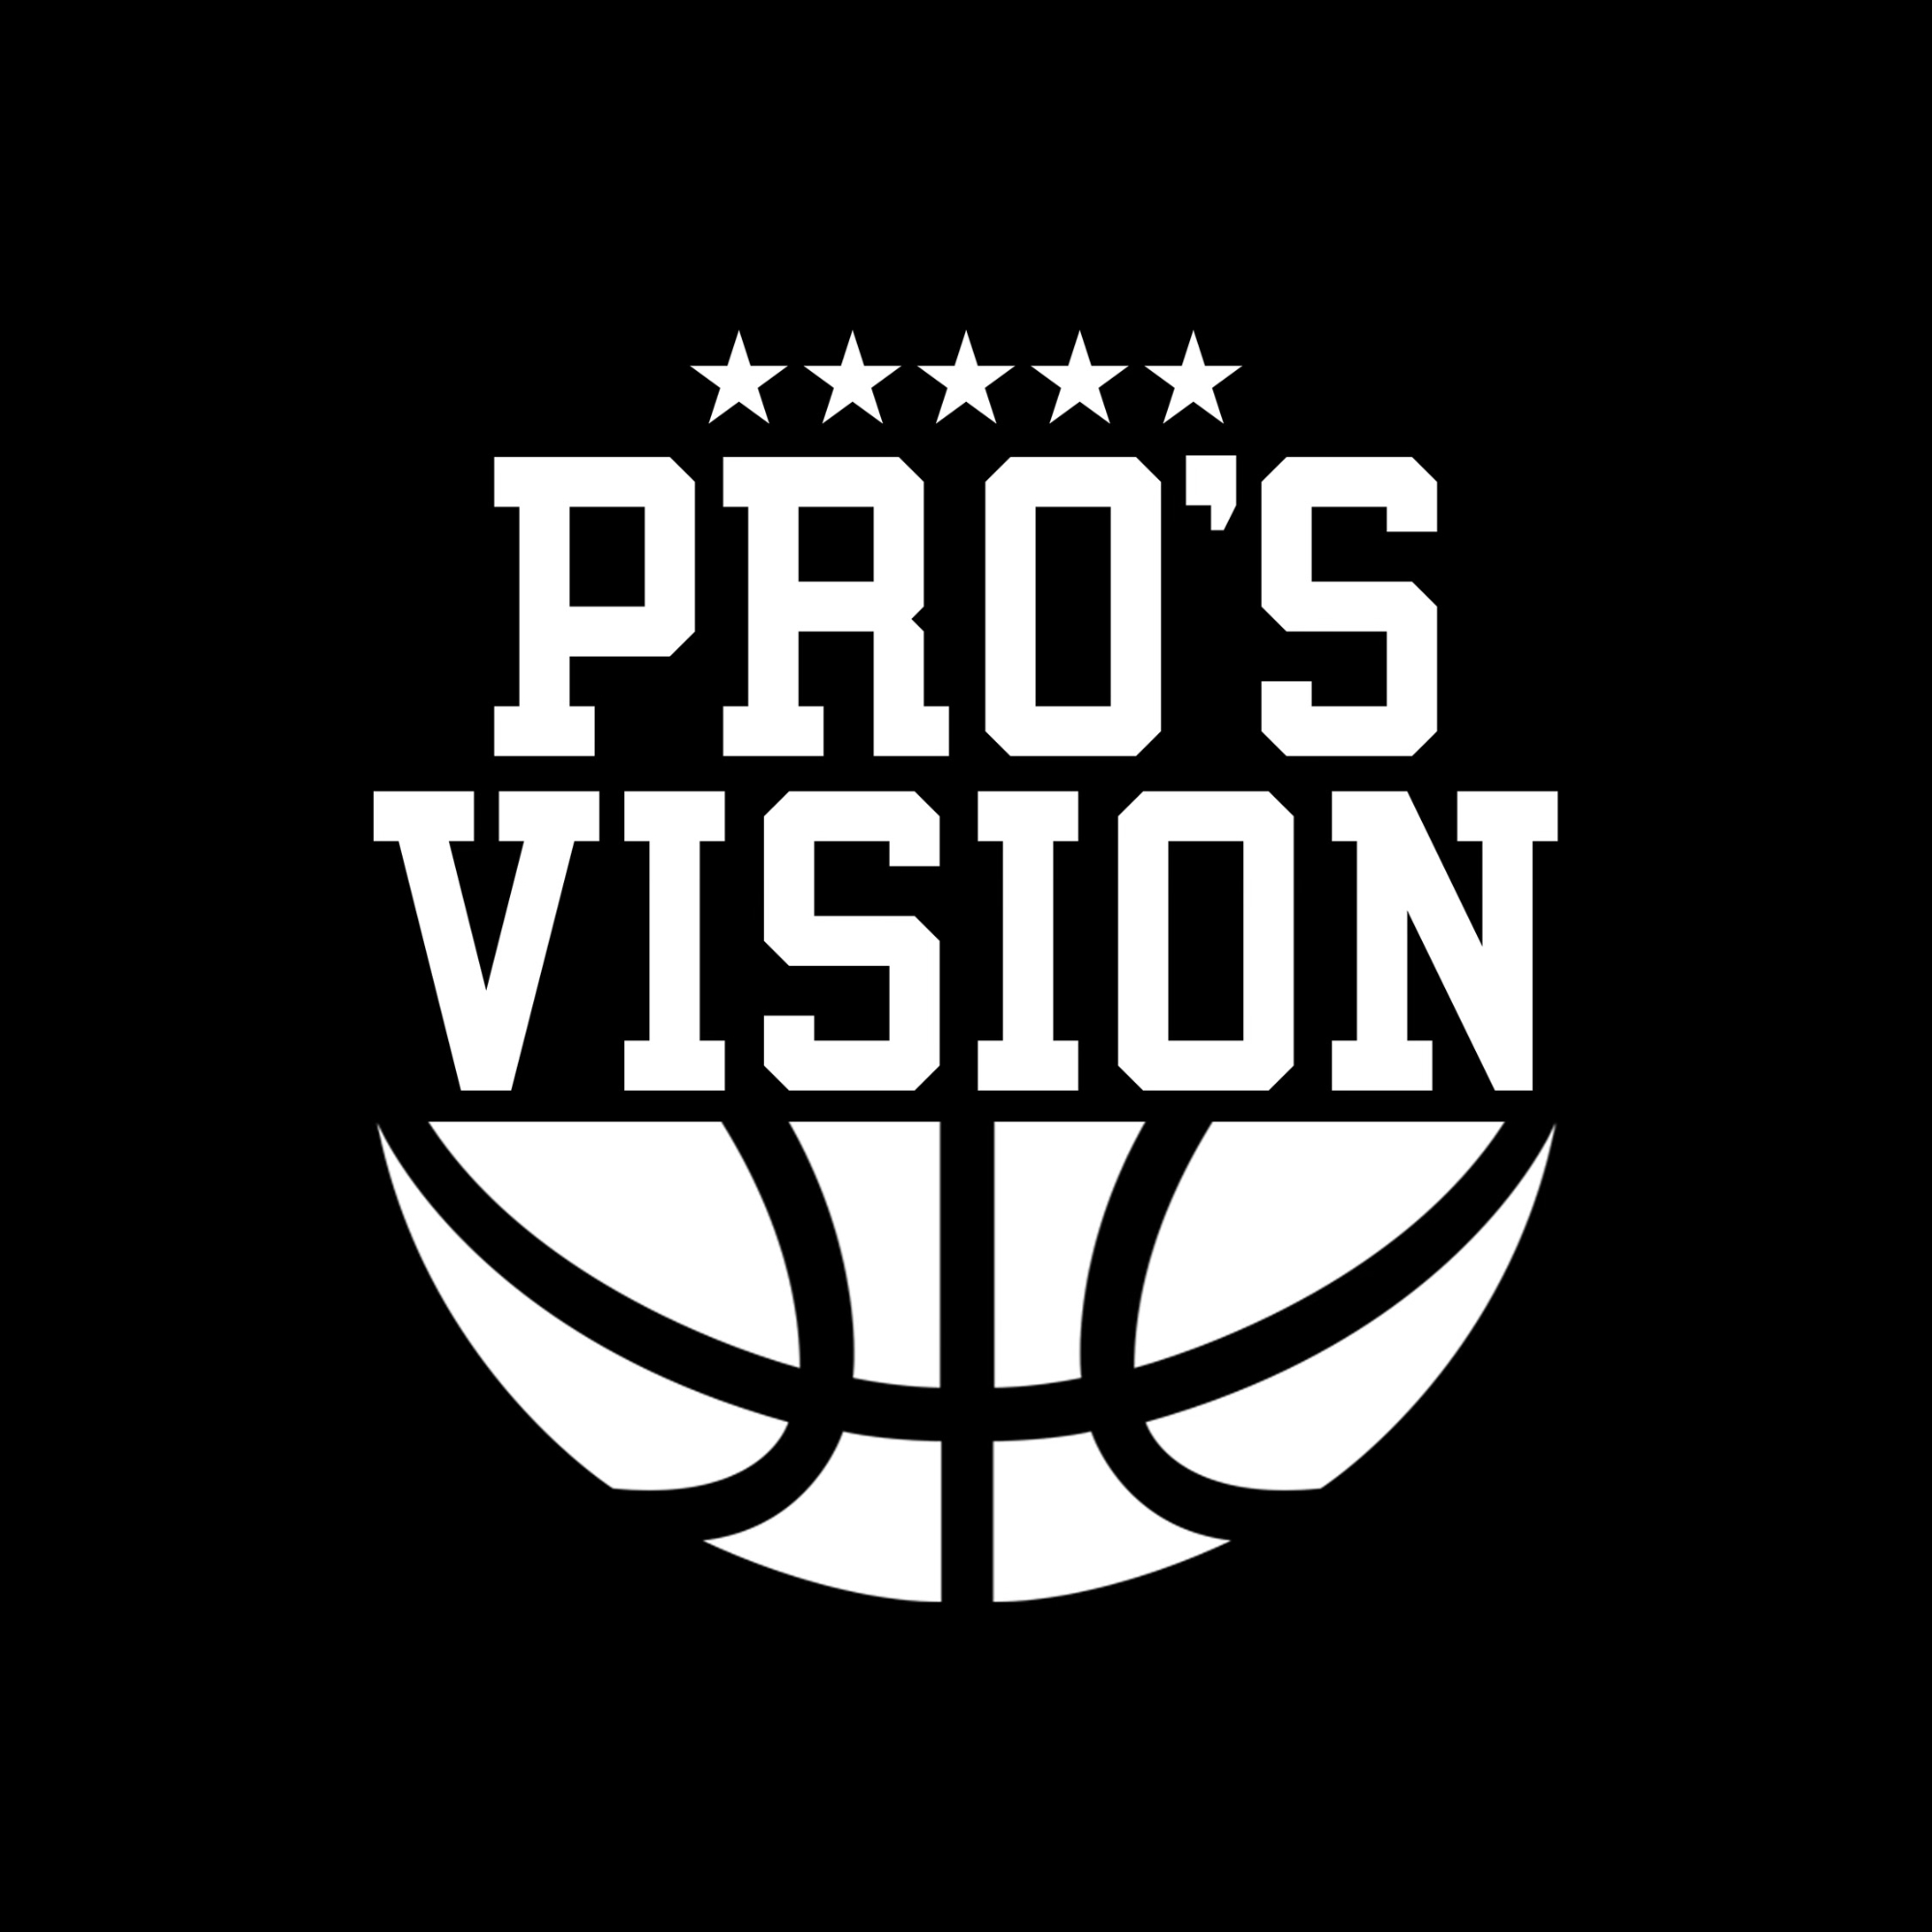 The official logo of Pros Vision